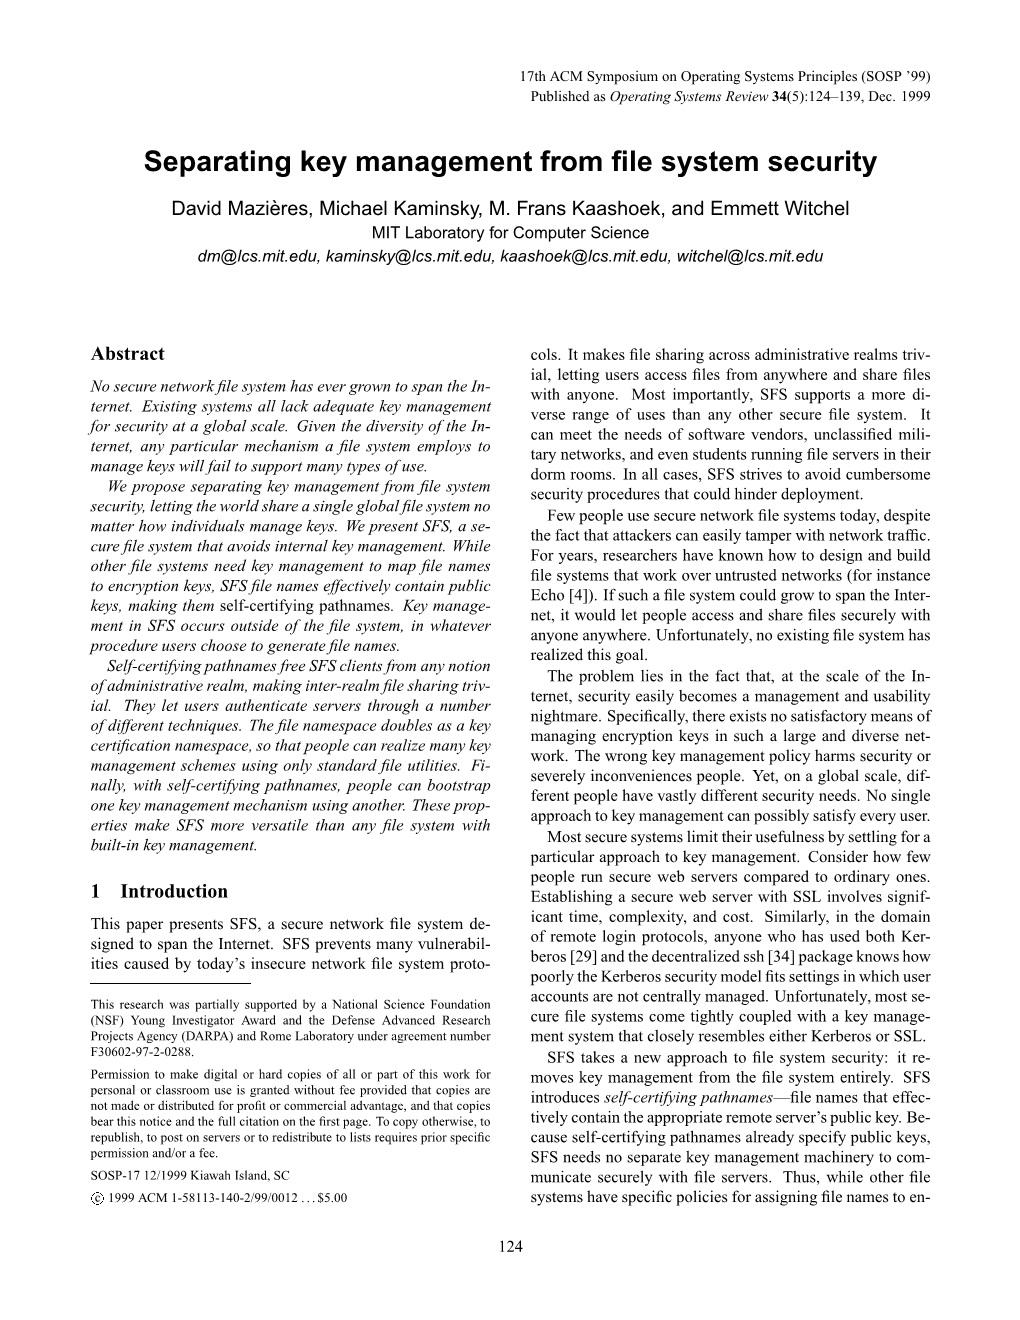 Separating Key Management from File System Security